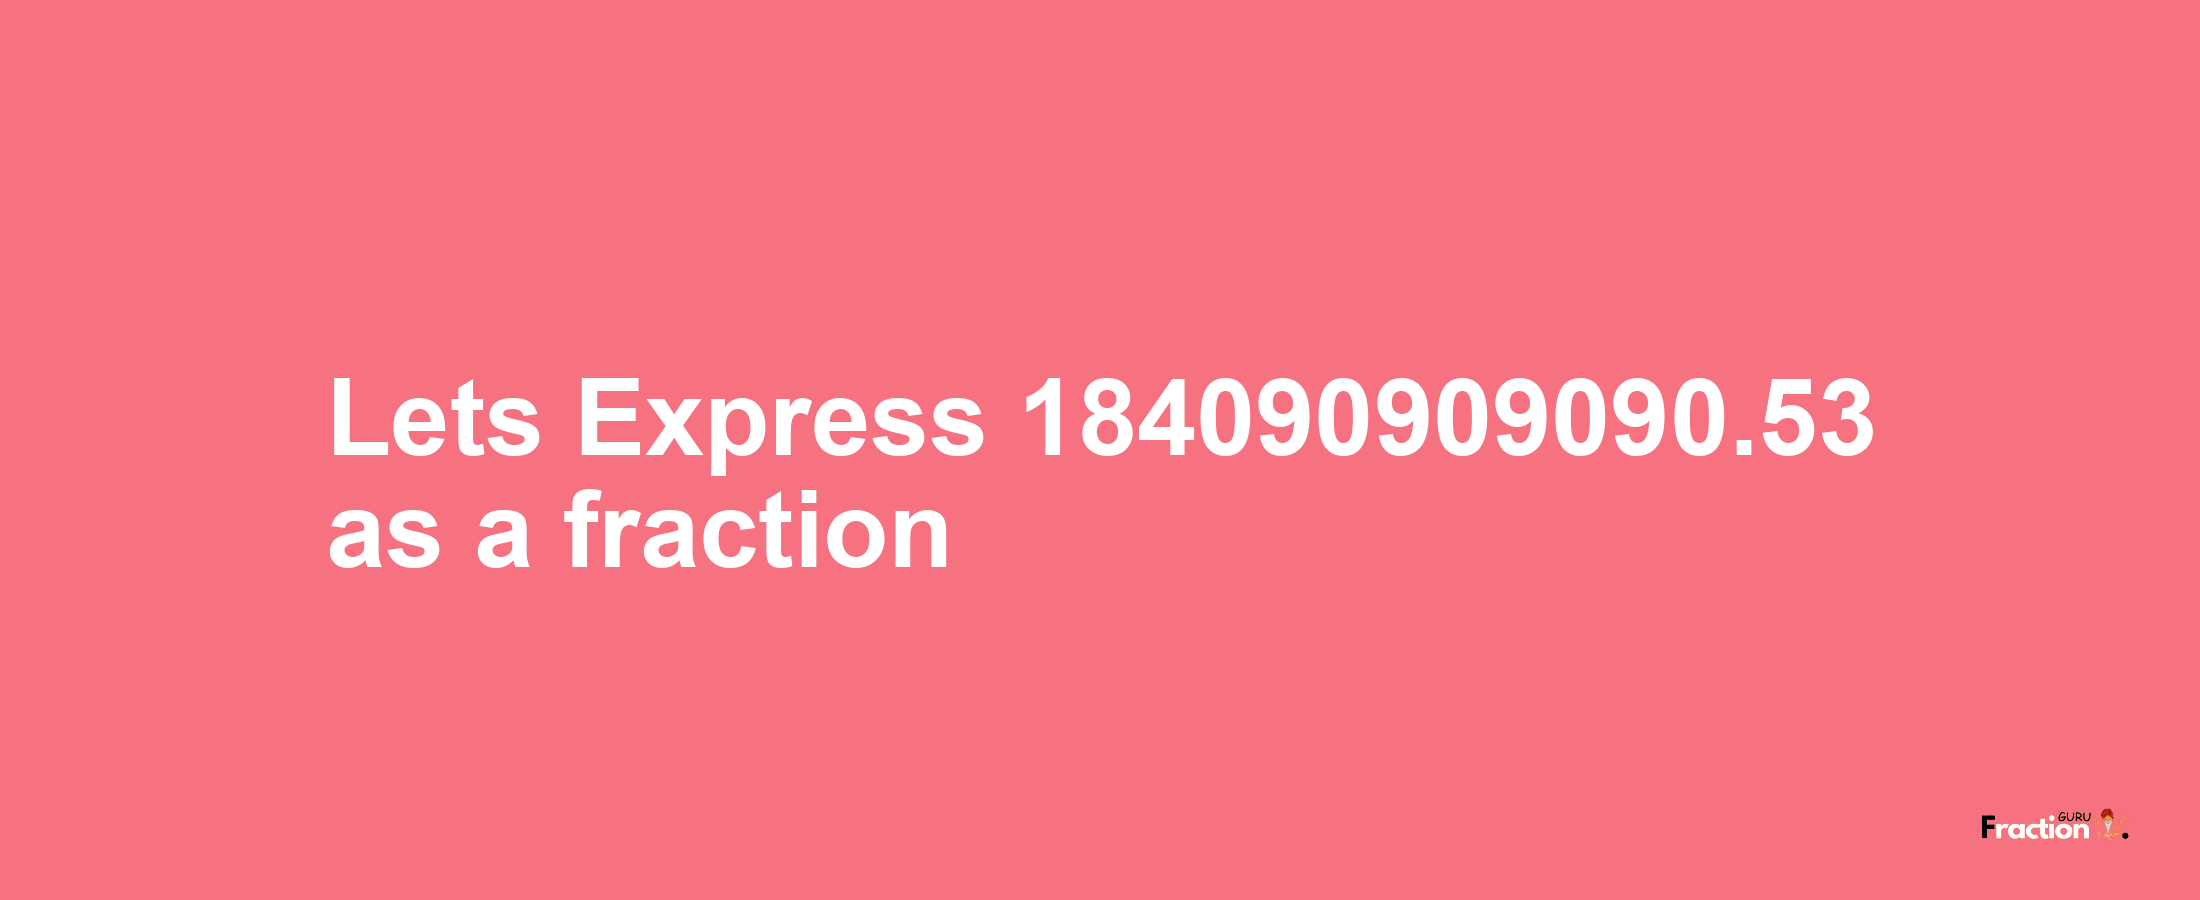 Lets Express 184090909090.53 as afraction